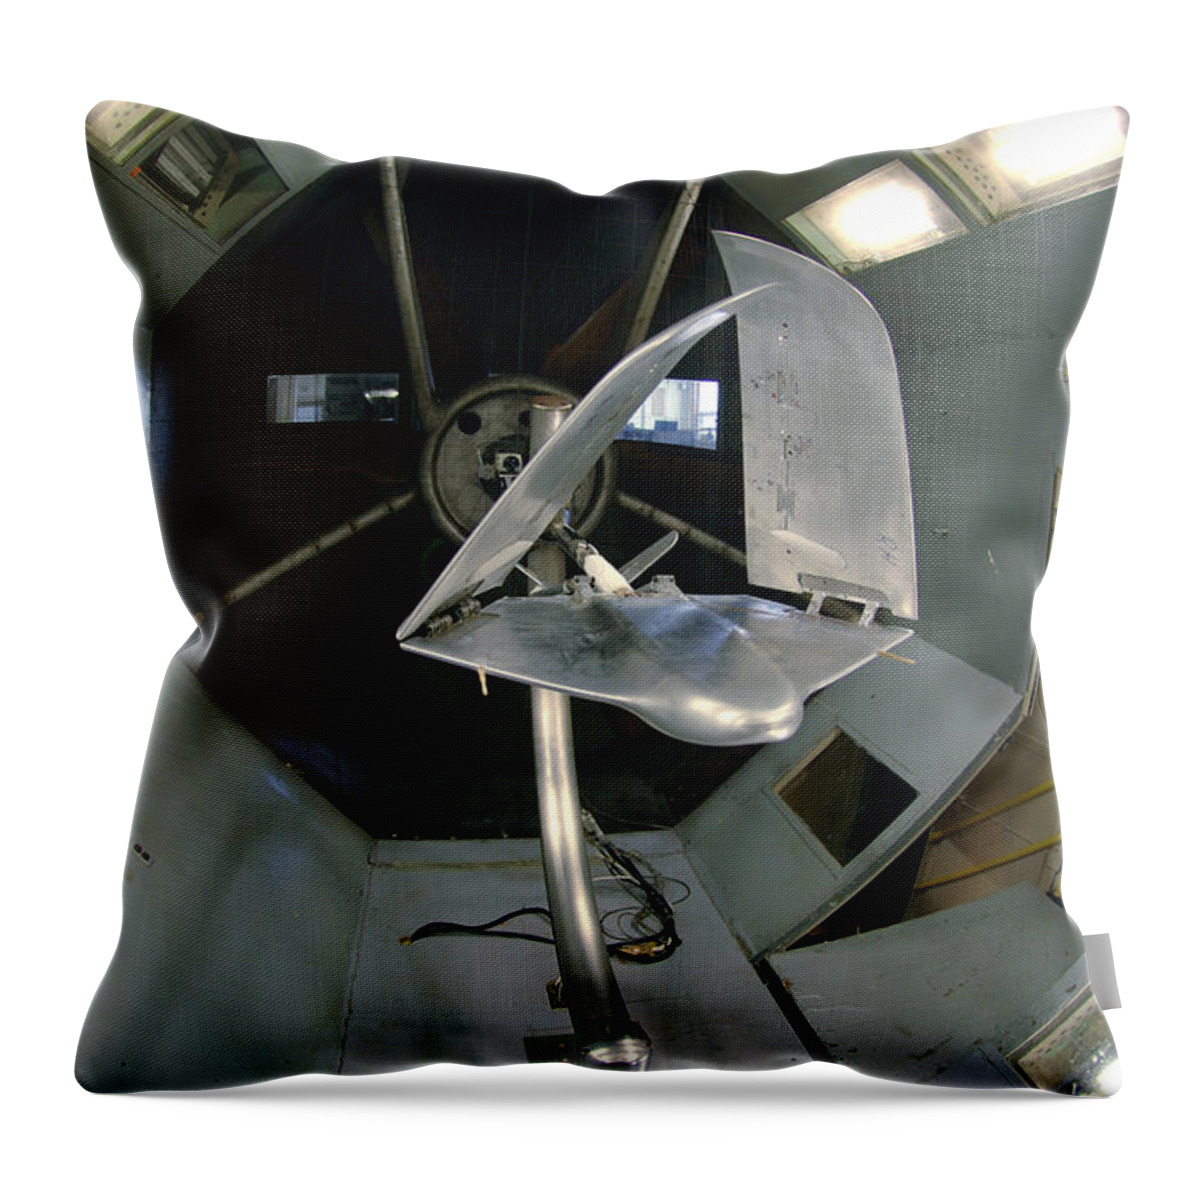 Technology Throw Pillow featuring the photograph Model Airplane In Wind Tunnel by Science Source